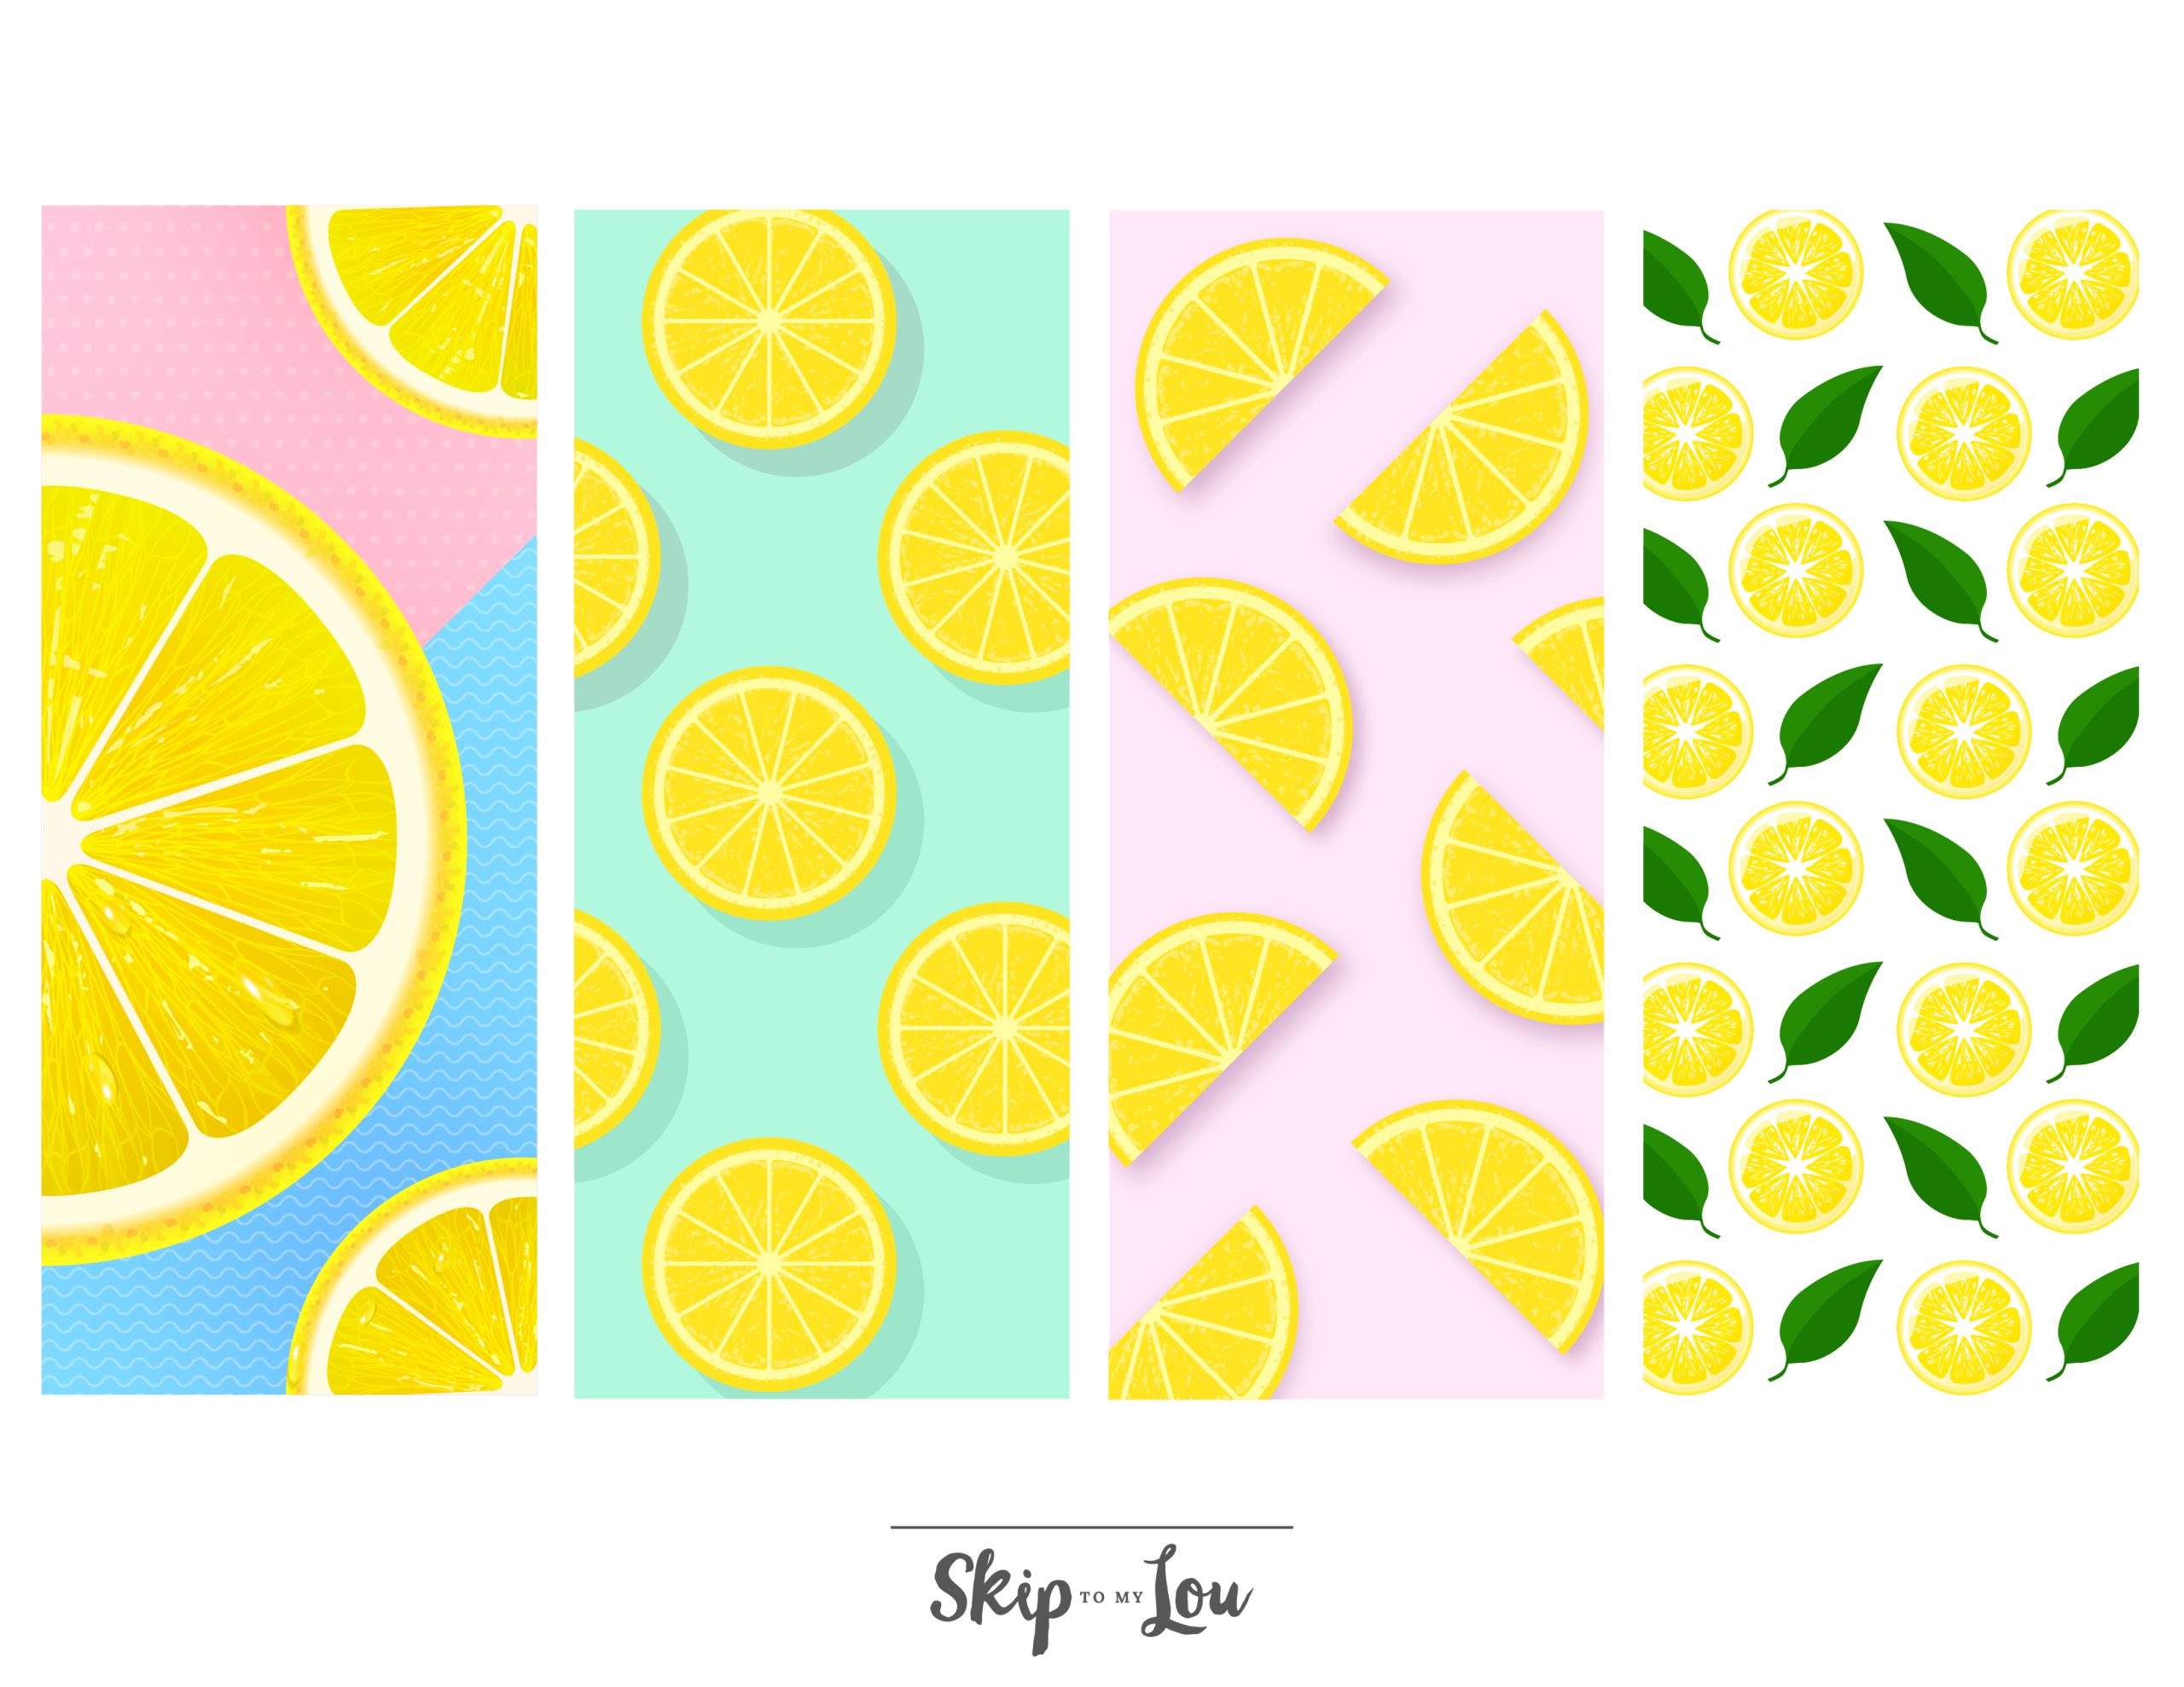 Lemon slices on four bookmarks, by Skip to my Lou.